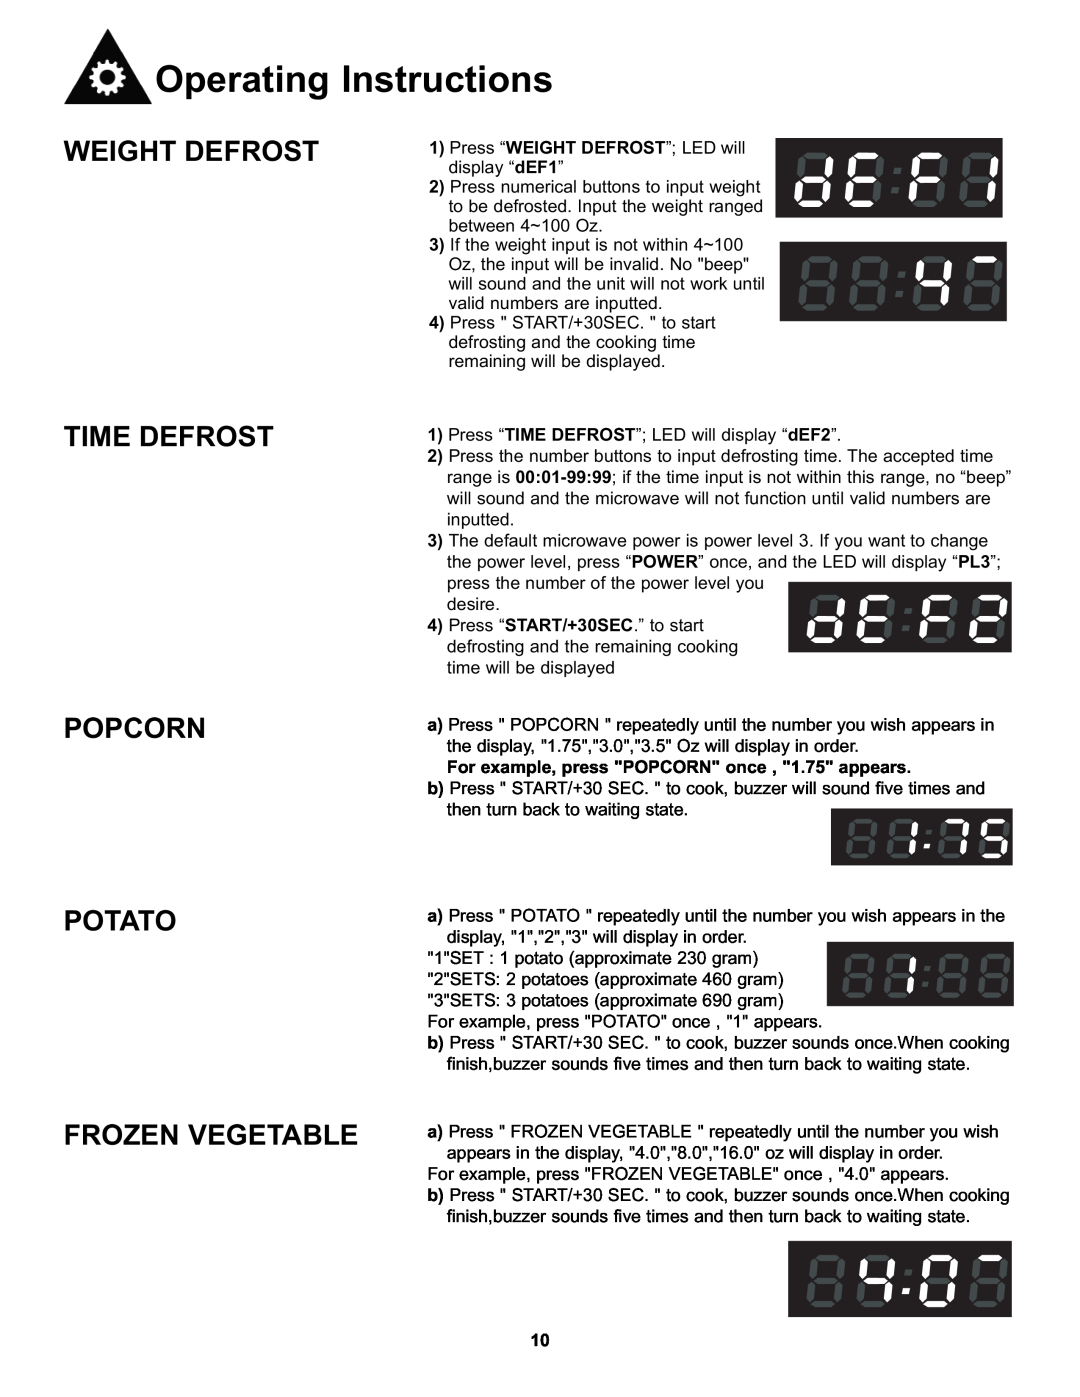 Danby DMW7700WDB manual Weight Defrost, Time Defrost Popcorn Potato Frozen Vegetable, Operating Instructions 